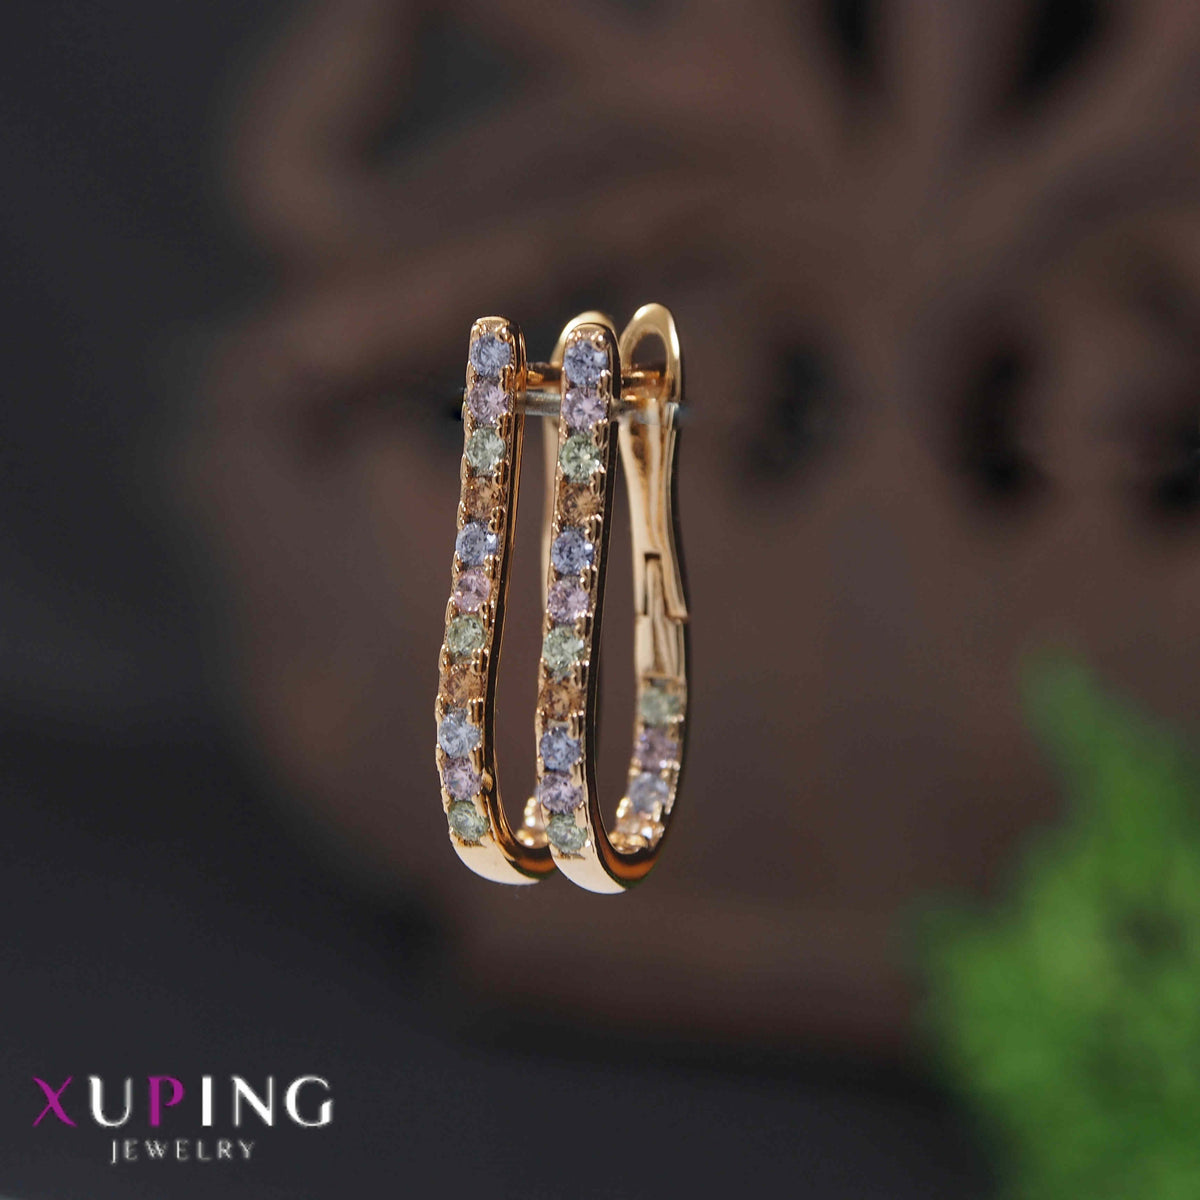 Gold Plated Multi Coloured Cubic Zicronia Xuping Earring- XPNGER 4495